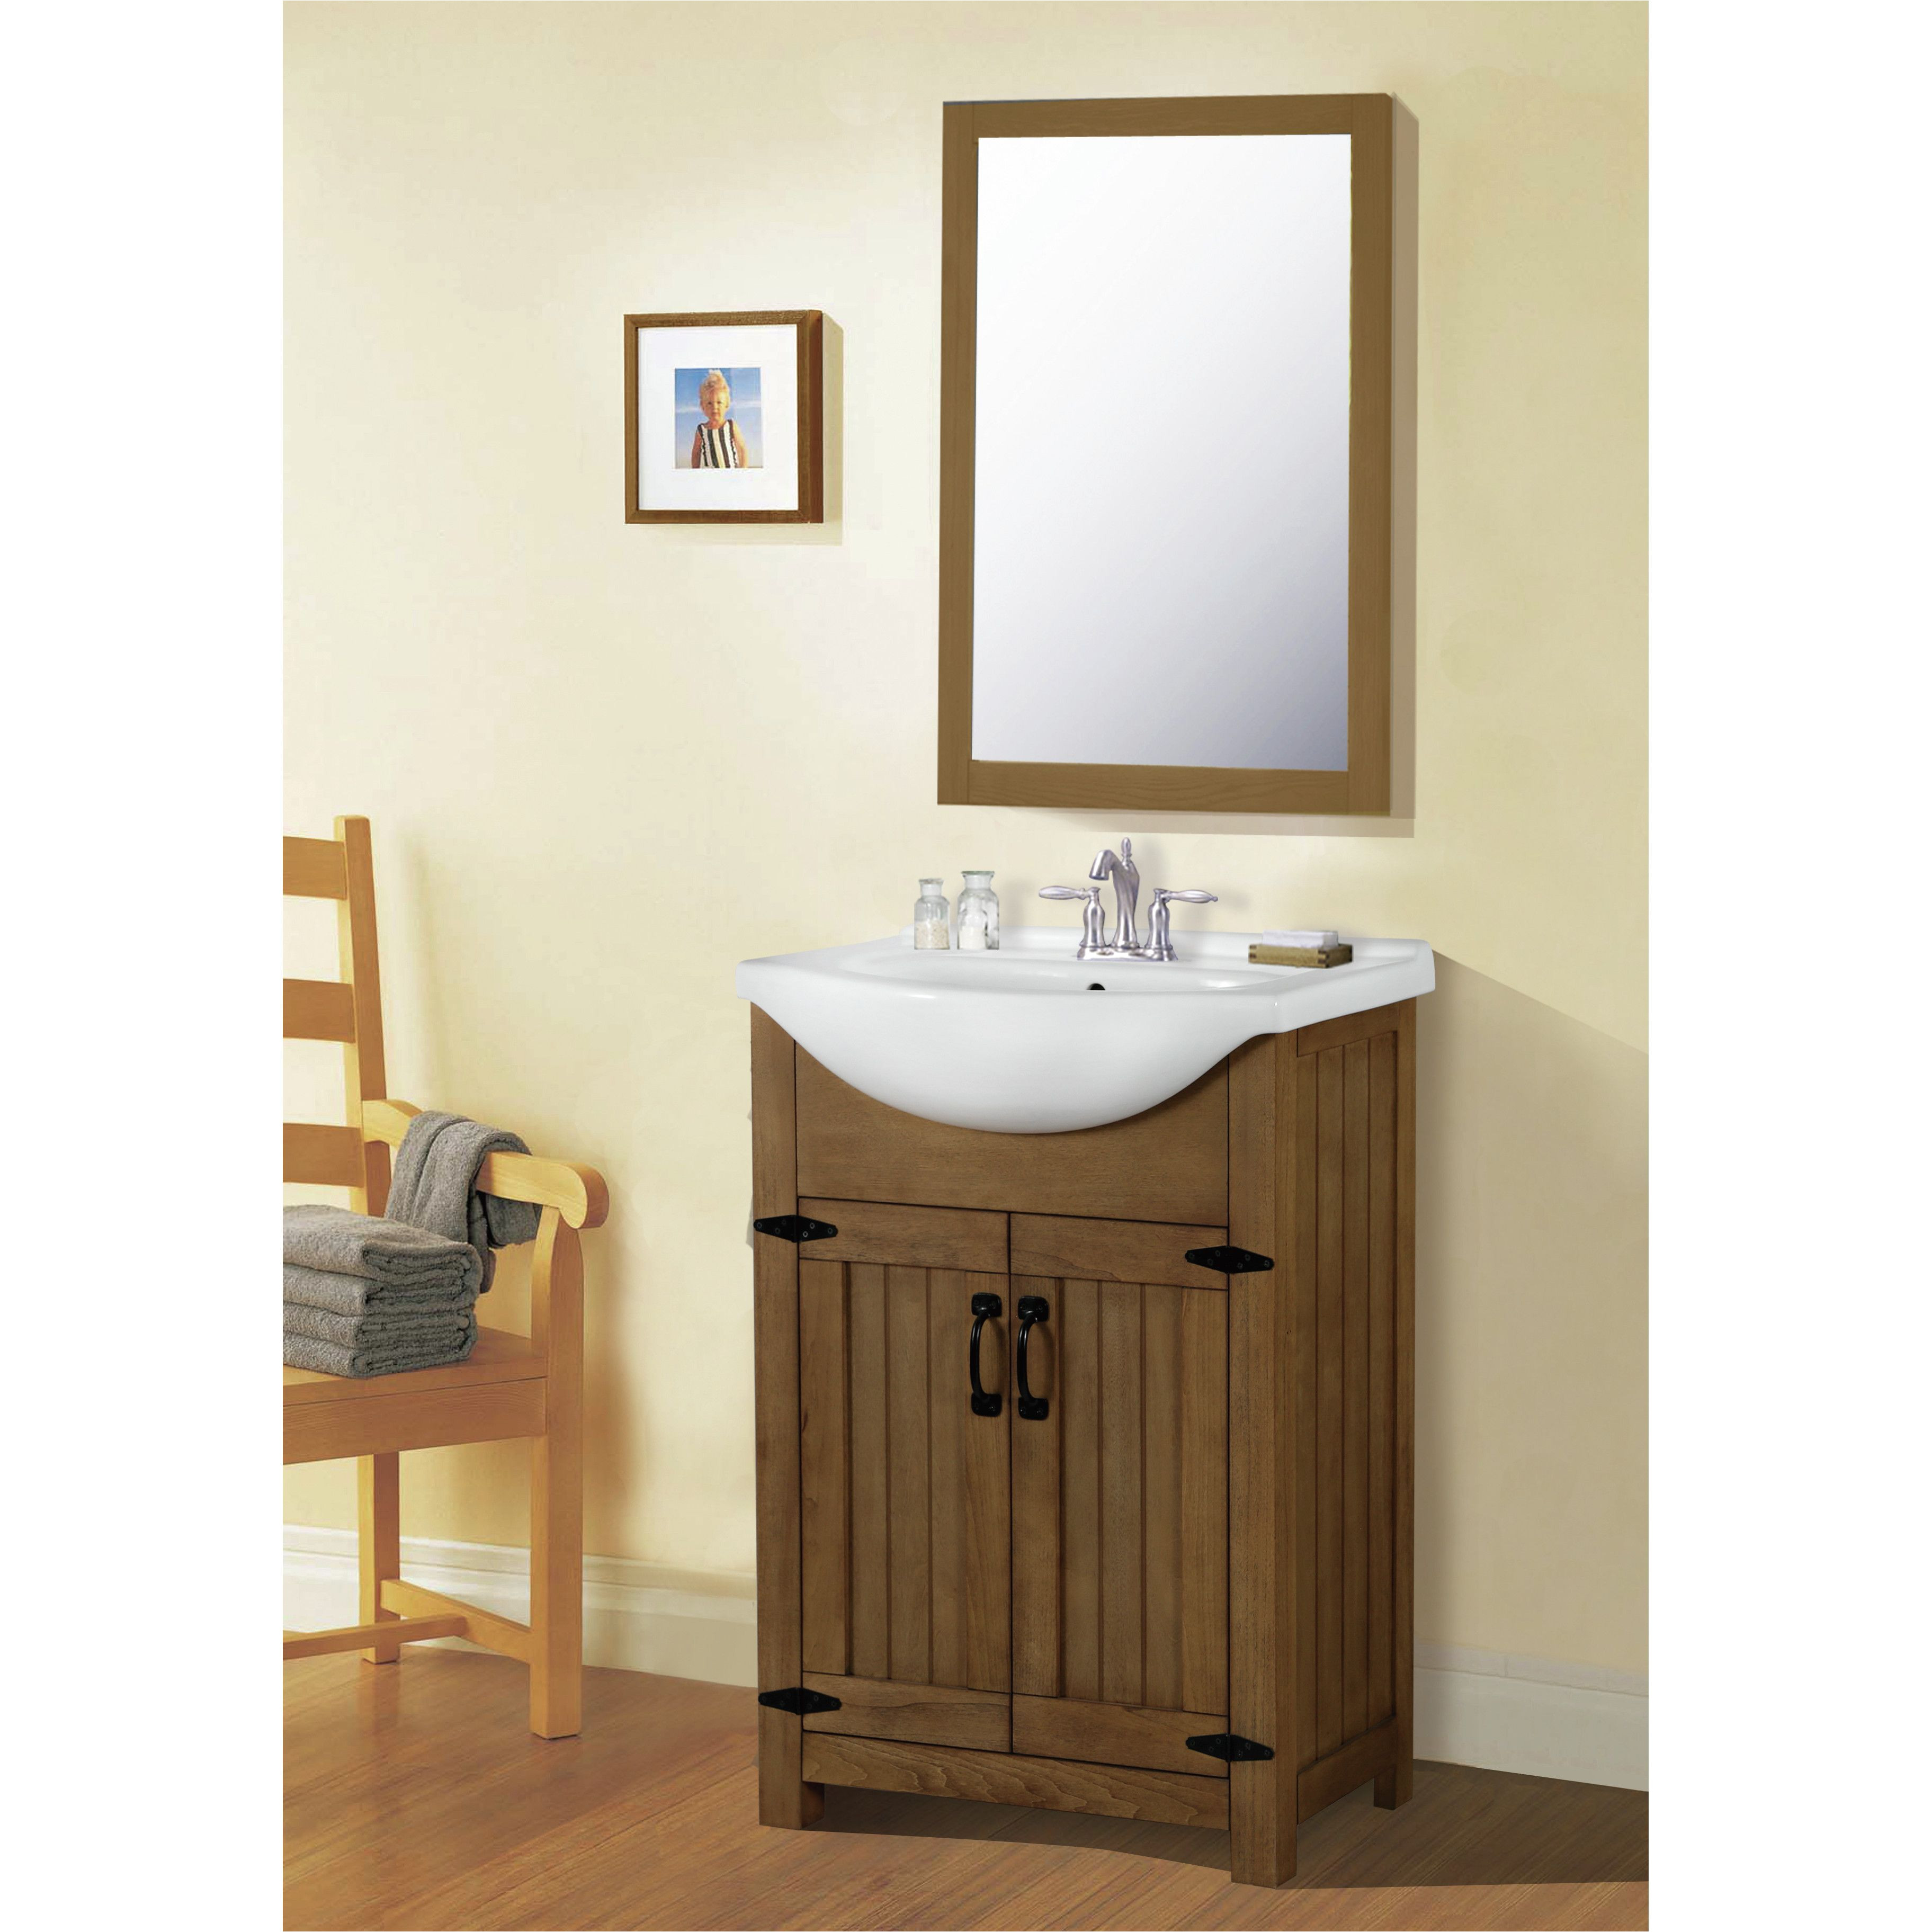 shop wayfair for all bathroom vanities to match every style and budget enjoy free shipping